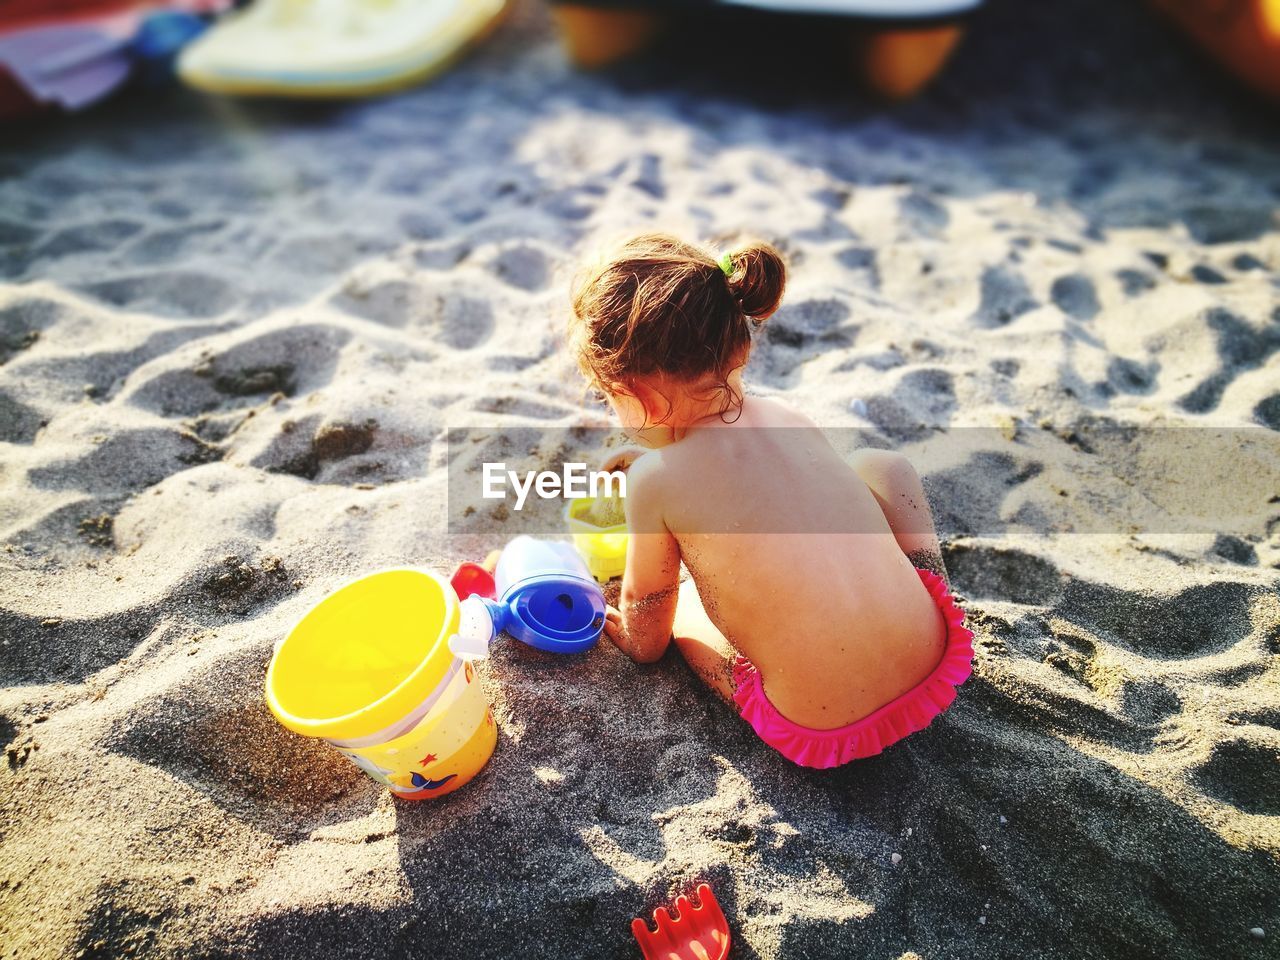 Rear view of shirtless baby girl playing with sand at beach